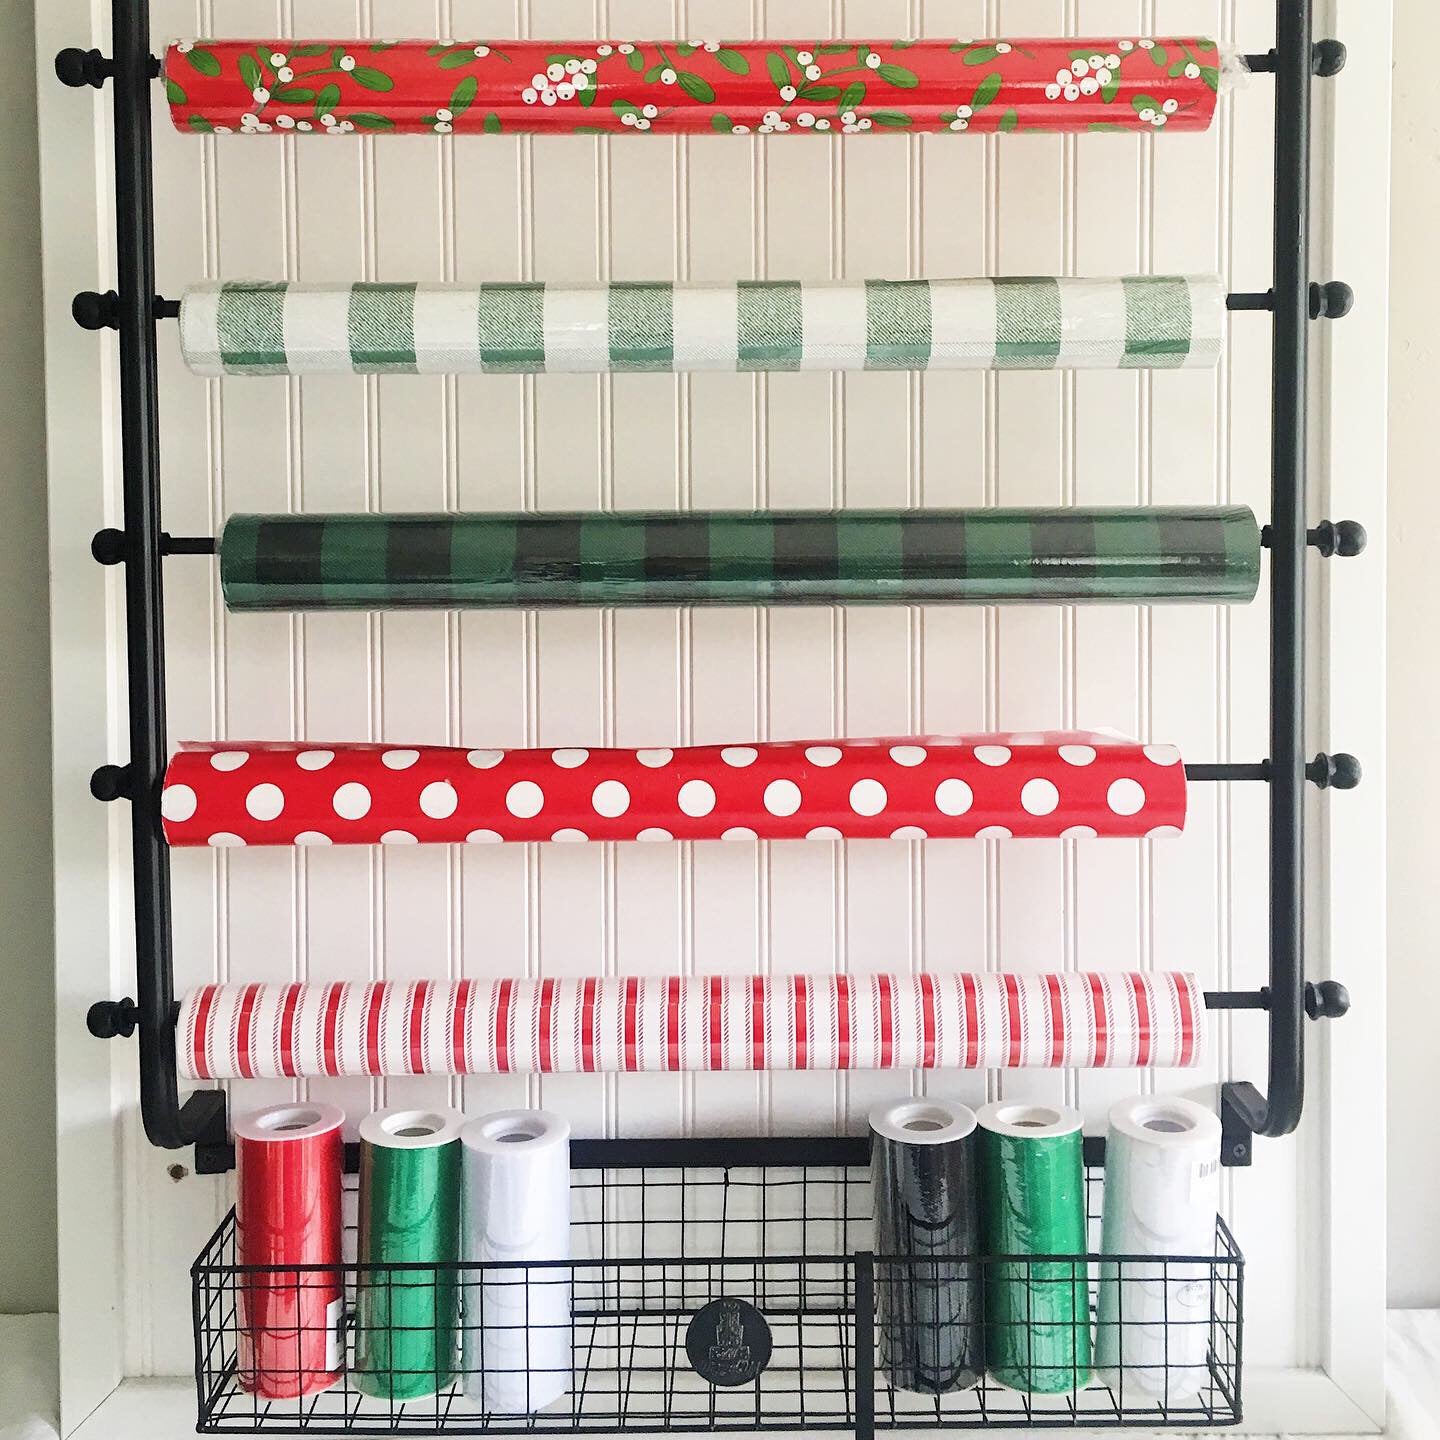 My new pantry shelves lined with wrapping paper from Michaels ($1.50 per  roll) covered in clear adhesi…